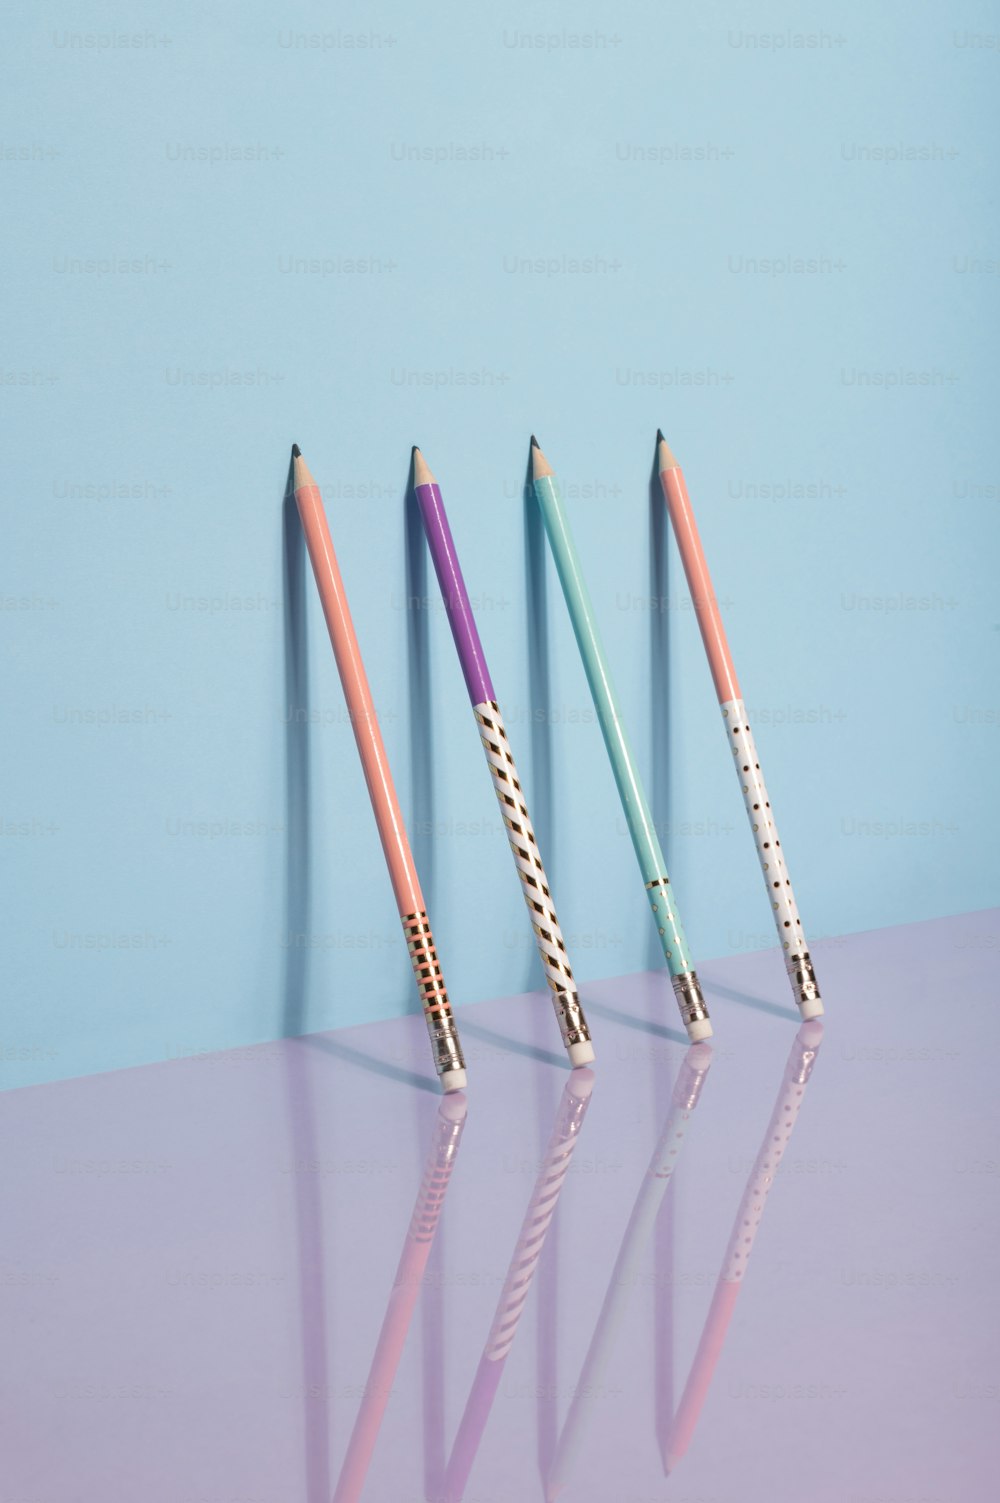 three different colored pencils are lined up in a row